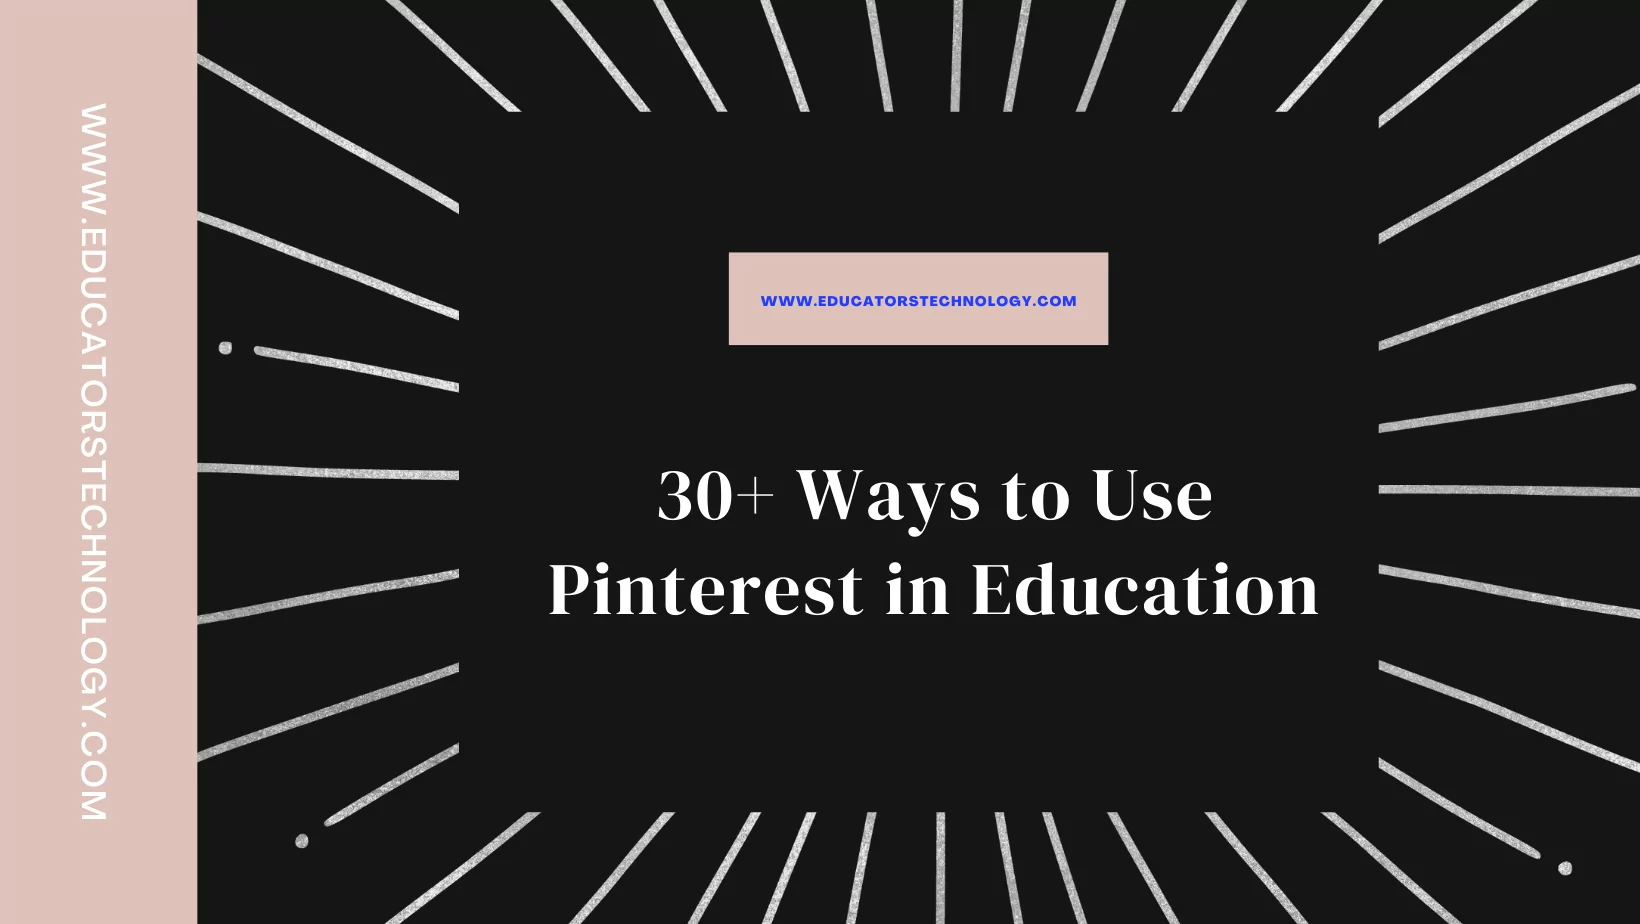 Ways to use Pinterest in education